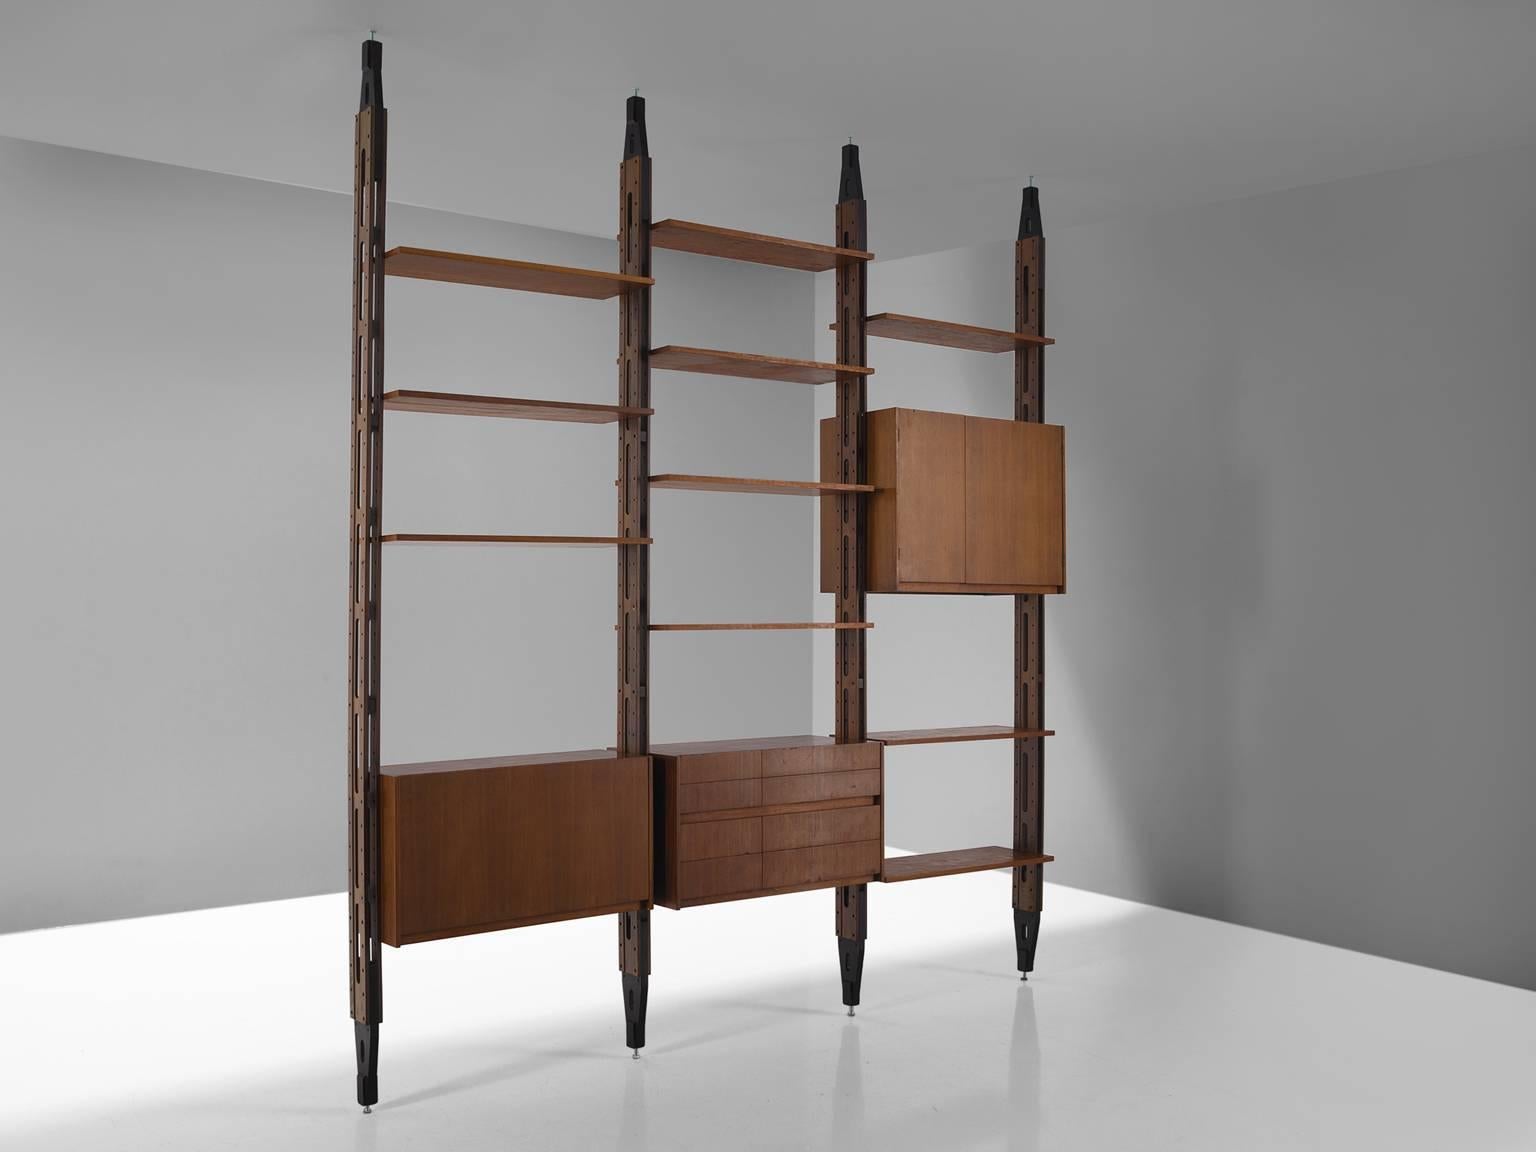 Modular wall unit, walnut, Italy, circa 1960 

The fundamental feature of the furniture designed by Franco Albini and his contemporaries is his way of focussing the attention one the supporting elements. This is clearly visible in this room